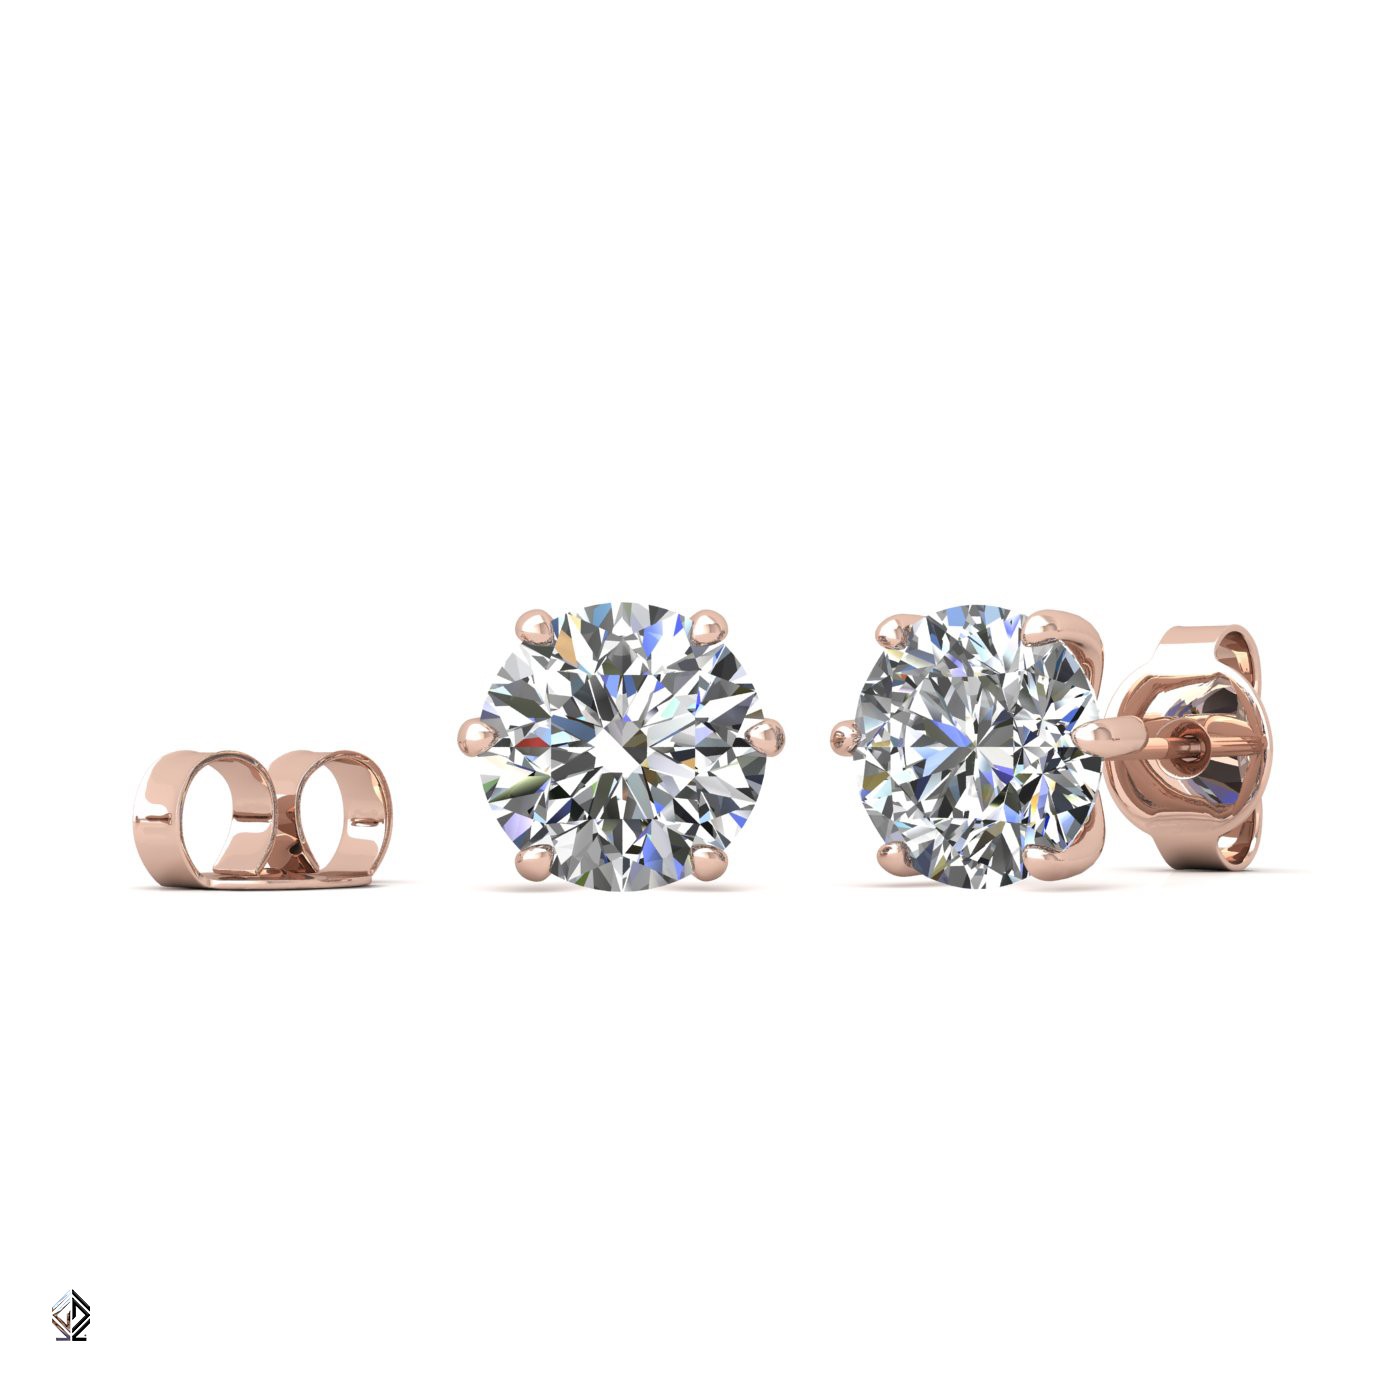 18k rose gold 1.0 ct each (2,0 tcw) 6 prongs round shape diamond earrings Photos & images